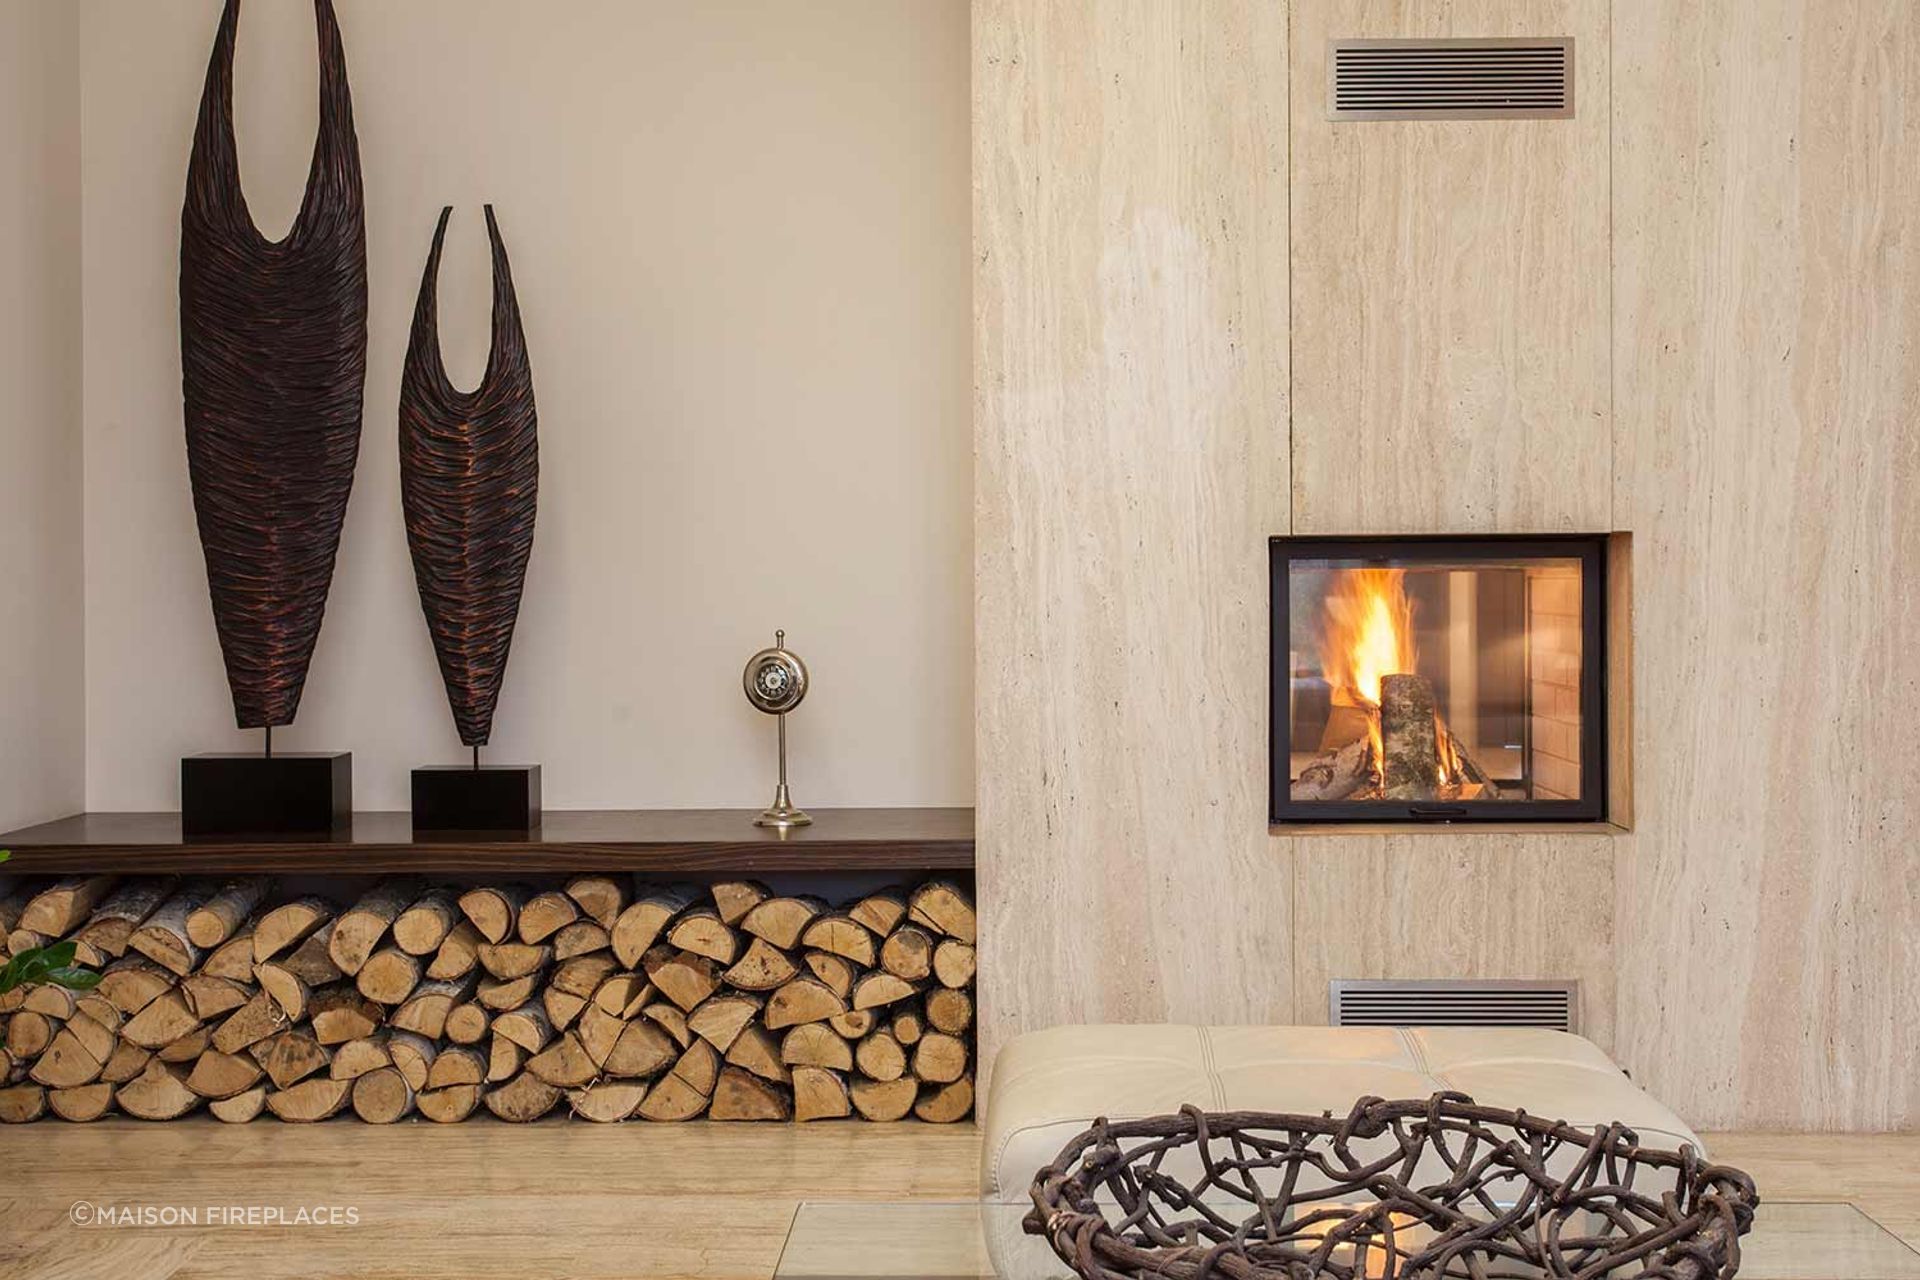 The 'Alberg Tunnel' fireplace insert is a cast iron firebox lined with vermiculite and features a glass door that allows for an aesthetically pleasing fire for your home.